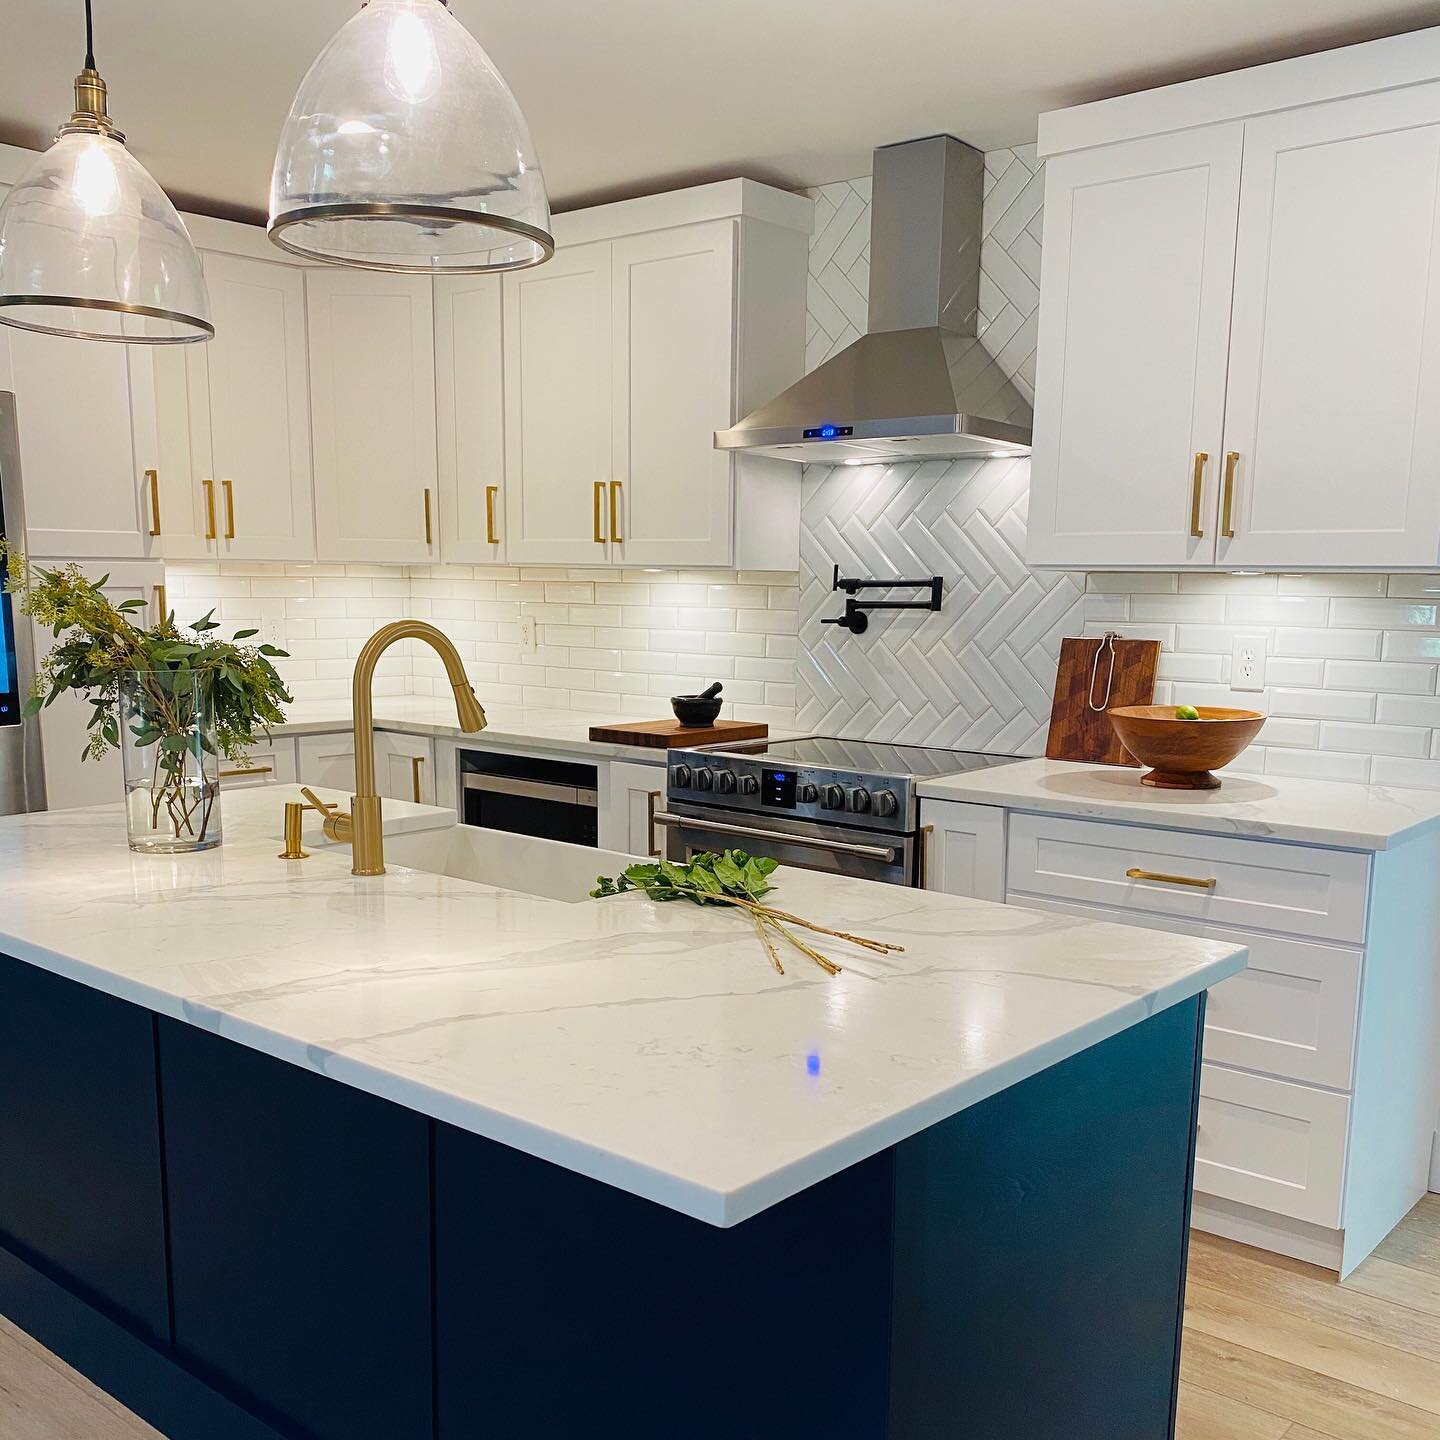 Thank you Chris &amp; Haley for trusting me with your new home! It&rsquo;s beautiful!
@king_creo #navyandwhitekitchen #goldfixtures #kr2construction 
#womancontractor #stpetersburg #stpetecontractors